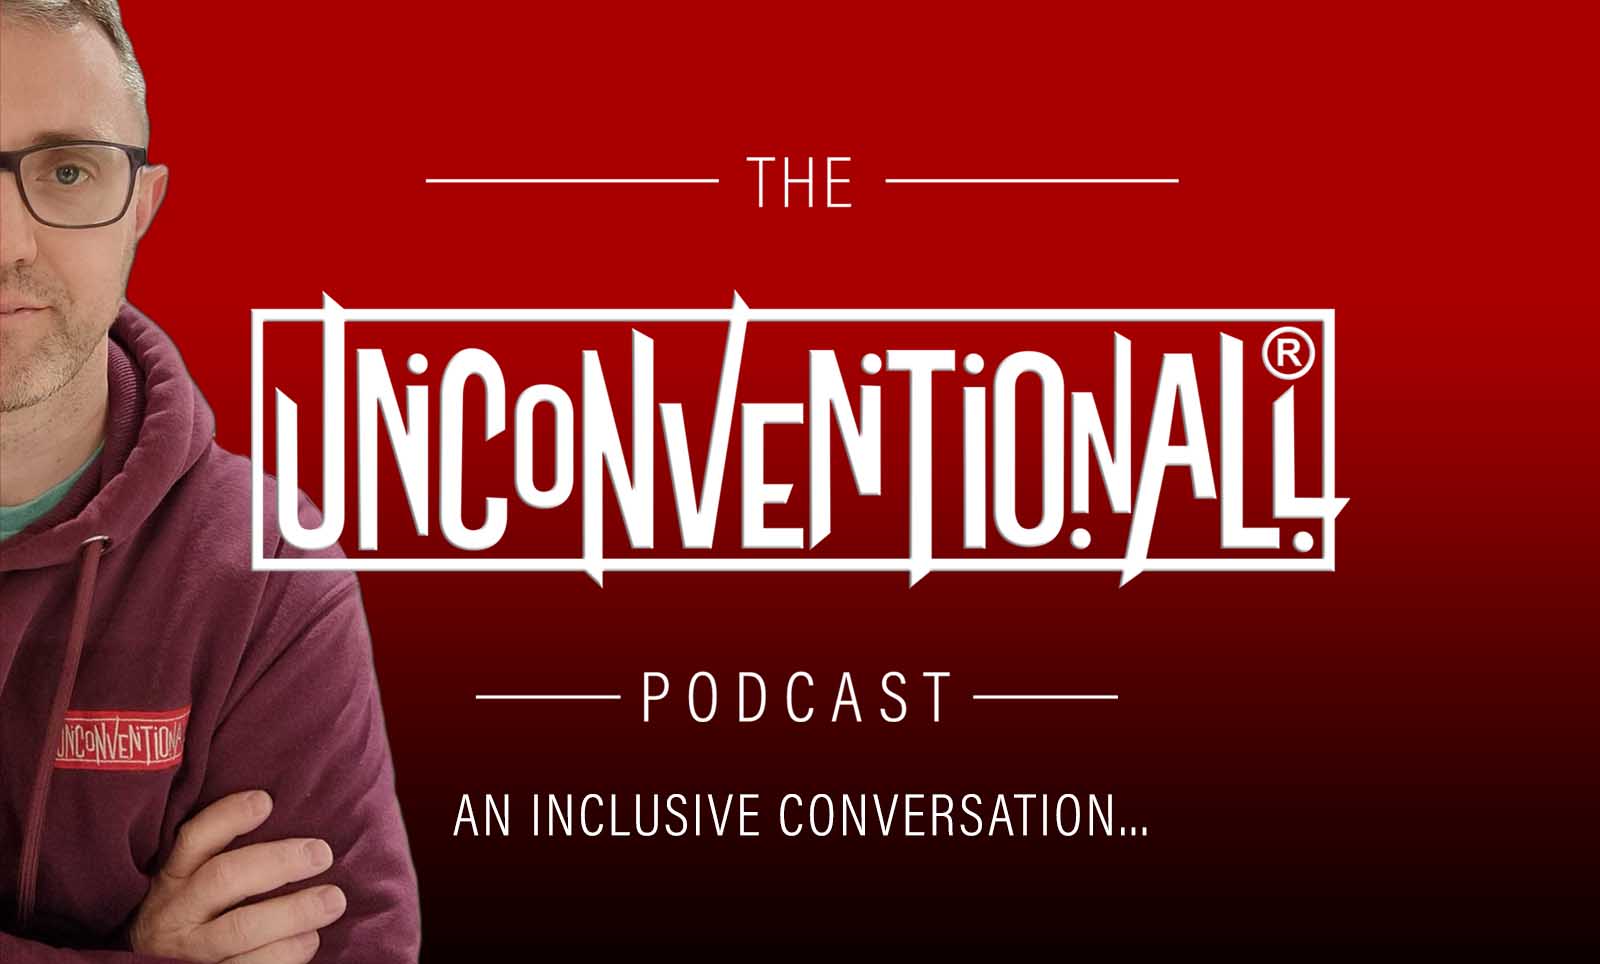 The Unconventionall Podcast